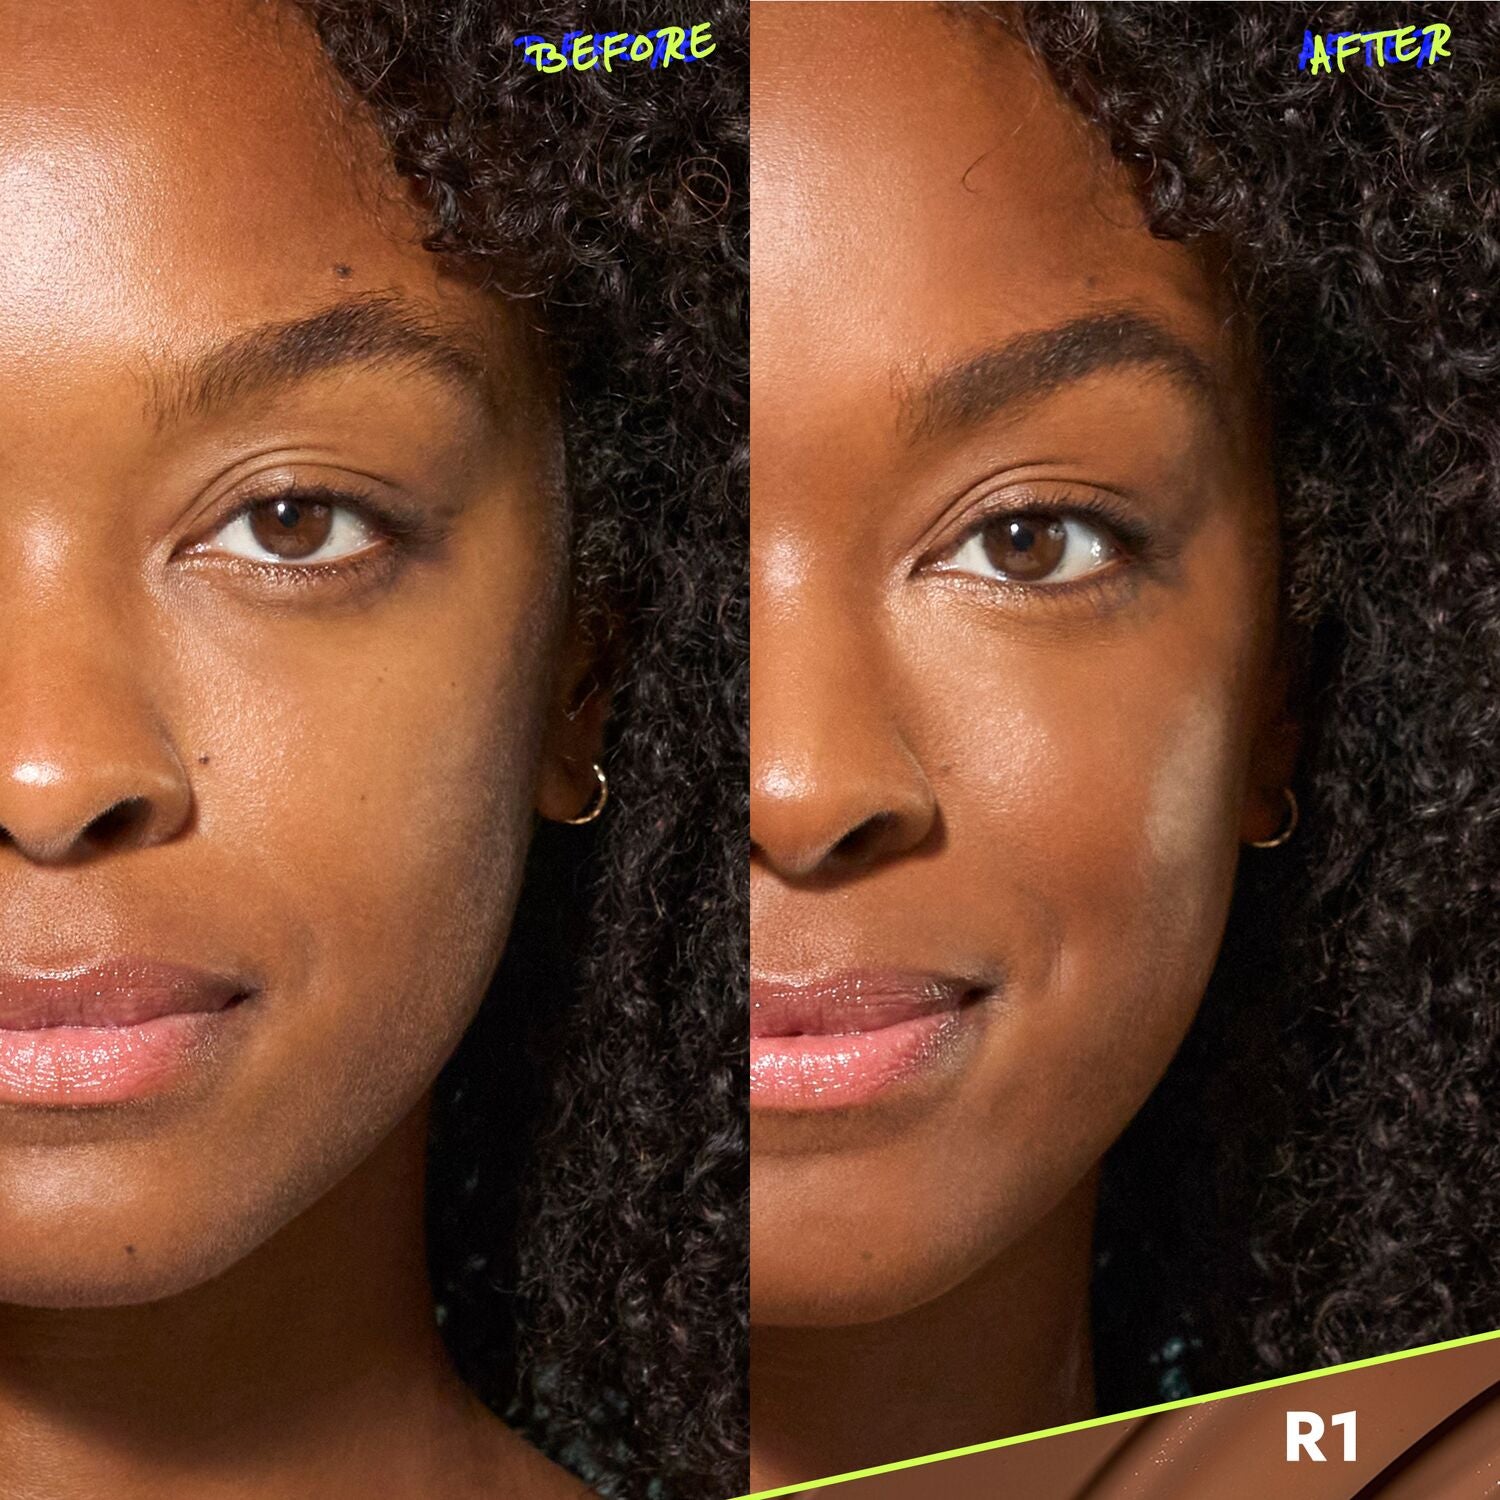 CoverFX Power Play Foundation before and after model image in shade R1